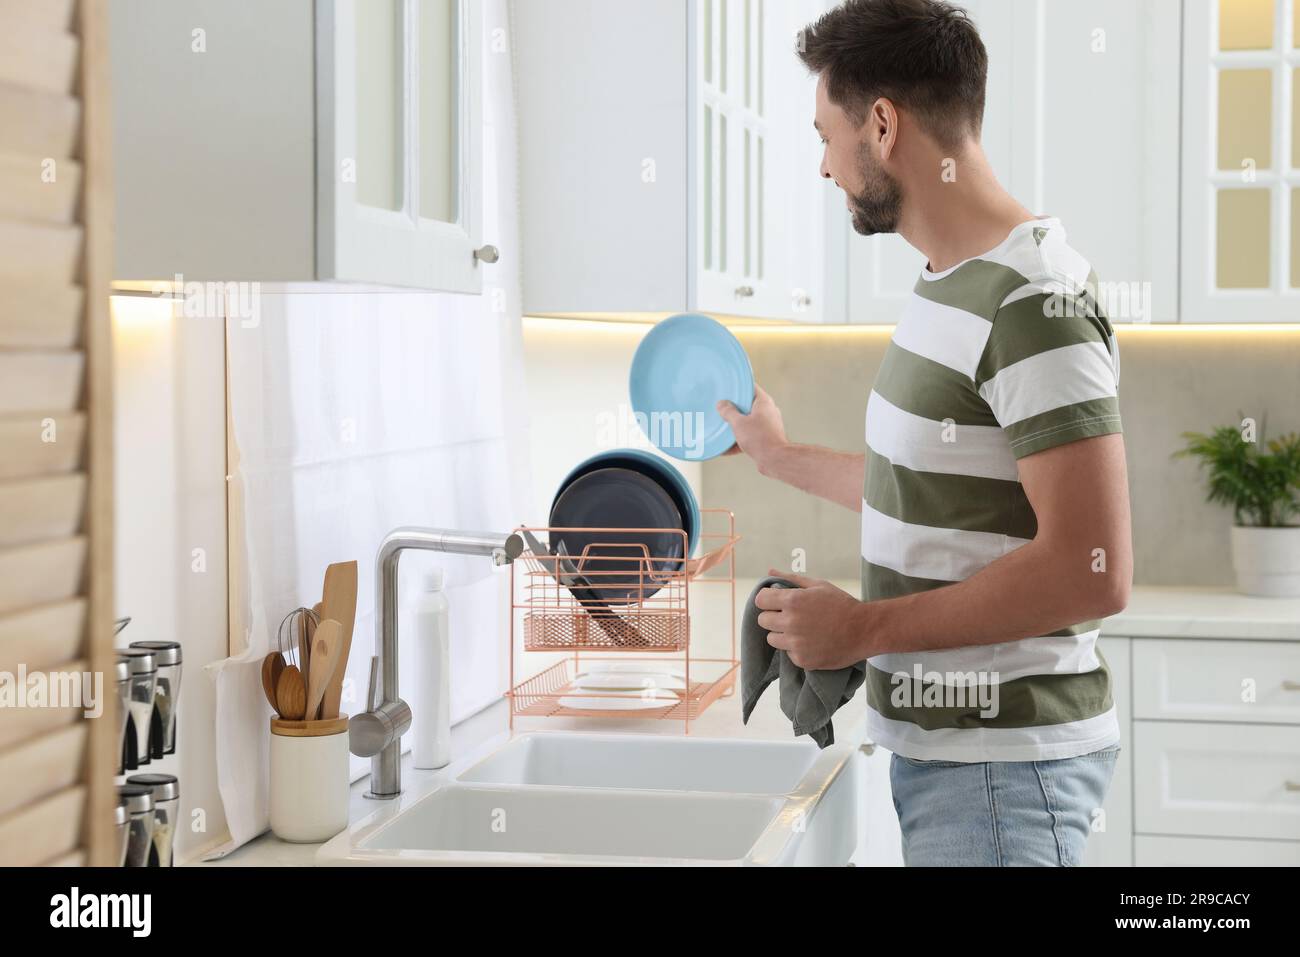 Man putting clean plate on drying rack in kitchen Stock Photo